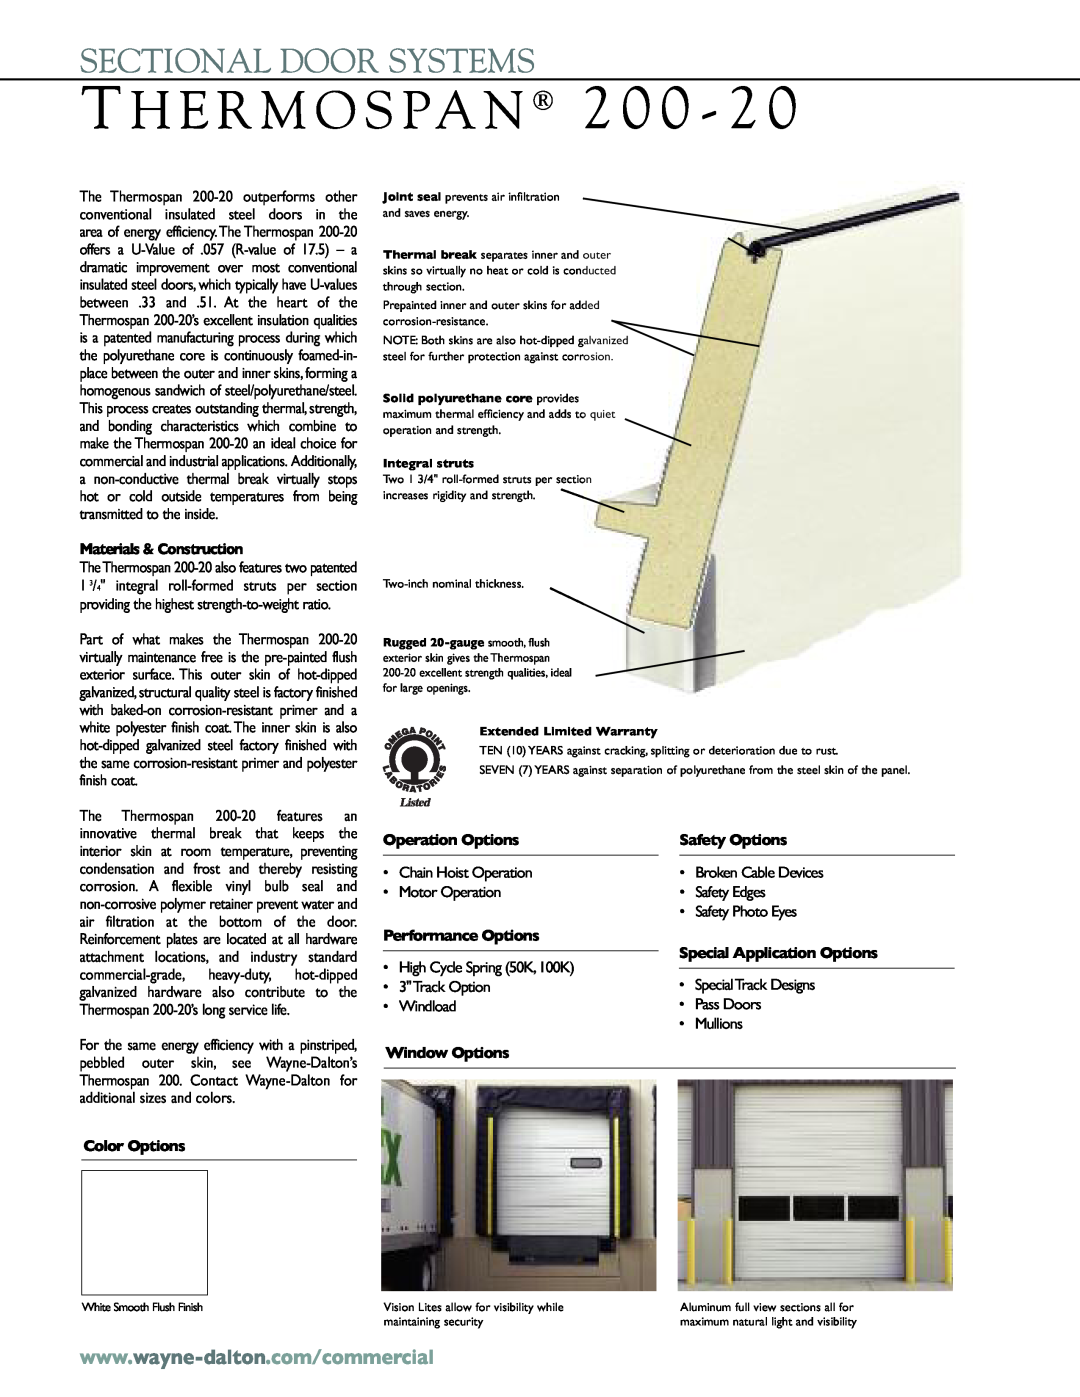 Wayne-Dalton 200-20 Sectional Door Systems, T H E R M O S Pa N, Materials & Construction, Color Options, Operation Options 